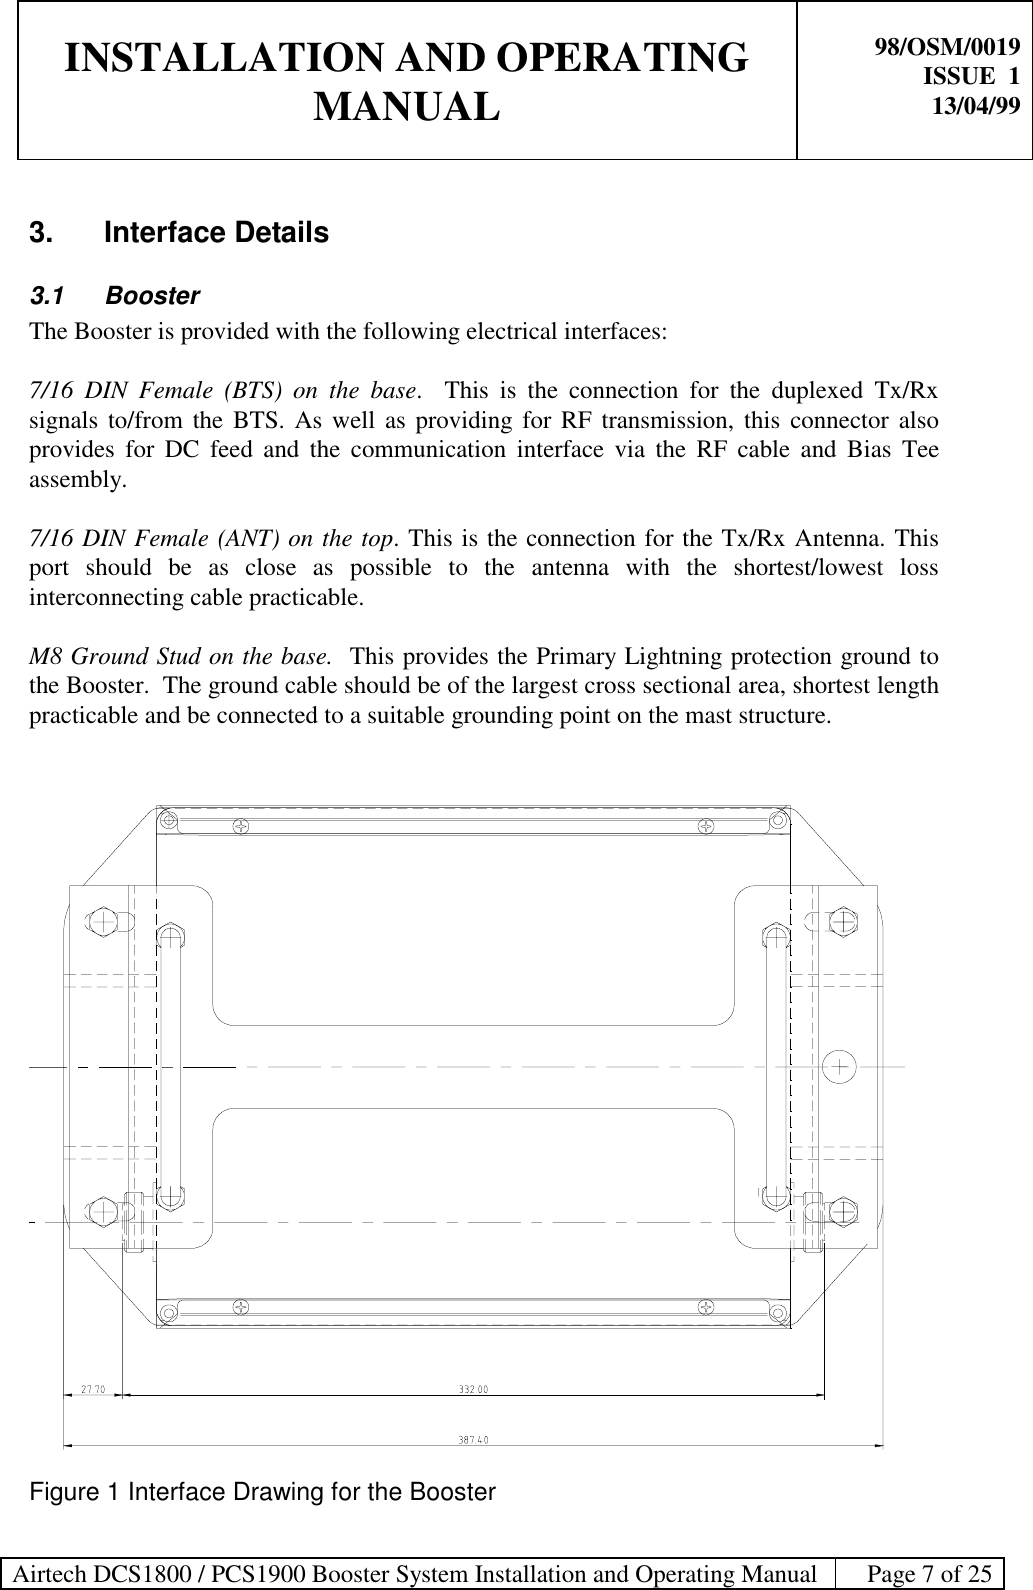 INSTALLATION AND OPERATINGMANUAL98/OSM/0019ISSUE  113/04/99Airtech DCS1800 / PCS1900 Booster System Installation and Operating Manual Page 7 of 253. Interface Details3.1 BoosterThe Booster is provided with the following electrical interfaces:7/16 DIN Female (BTS) on the base.  This is the connection for the duplexed Tx/Rxsignals to/from the BTS. As well as providing for RF transmission, this connector alsoprovides for DC feed and the communication interface via the RF cable and Bias Teeassembly.7/16 DIN Female (ANT) on the top. This is the connection for the Tx/Rx Antenna. Thisport should be as close as possible to the antenna with the shortest/lowest lossinterconnecting cable practicable.M8 Ground Stud on the base.  This provides the Primary Lightning protection ground tothe Booster.  The ground cable should be of the largest cross sectional area, shortest lengthpracticable and be connected to a suitable grounding point on the mast structure.Figure 1 Interface Drawing for the Booster